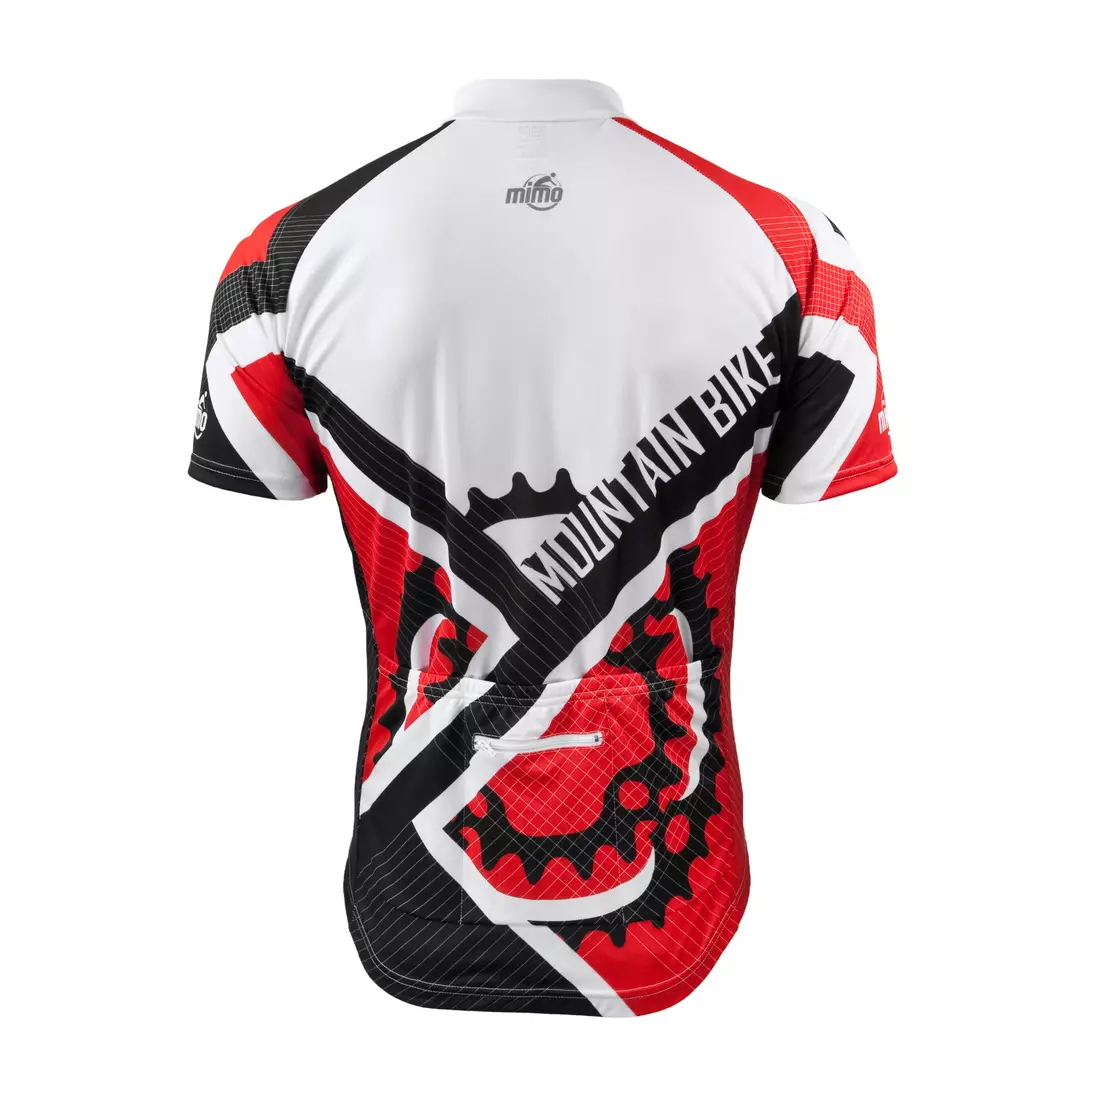 MikeSPORT DESIGN MB cycling jersey, red